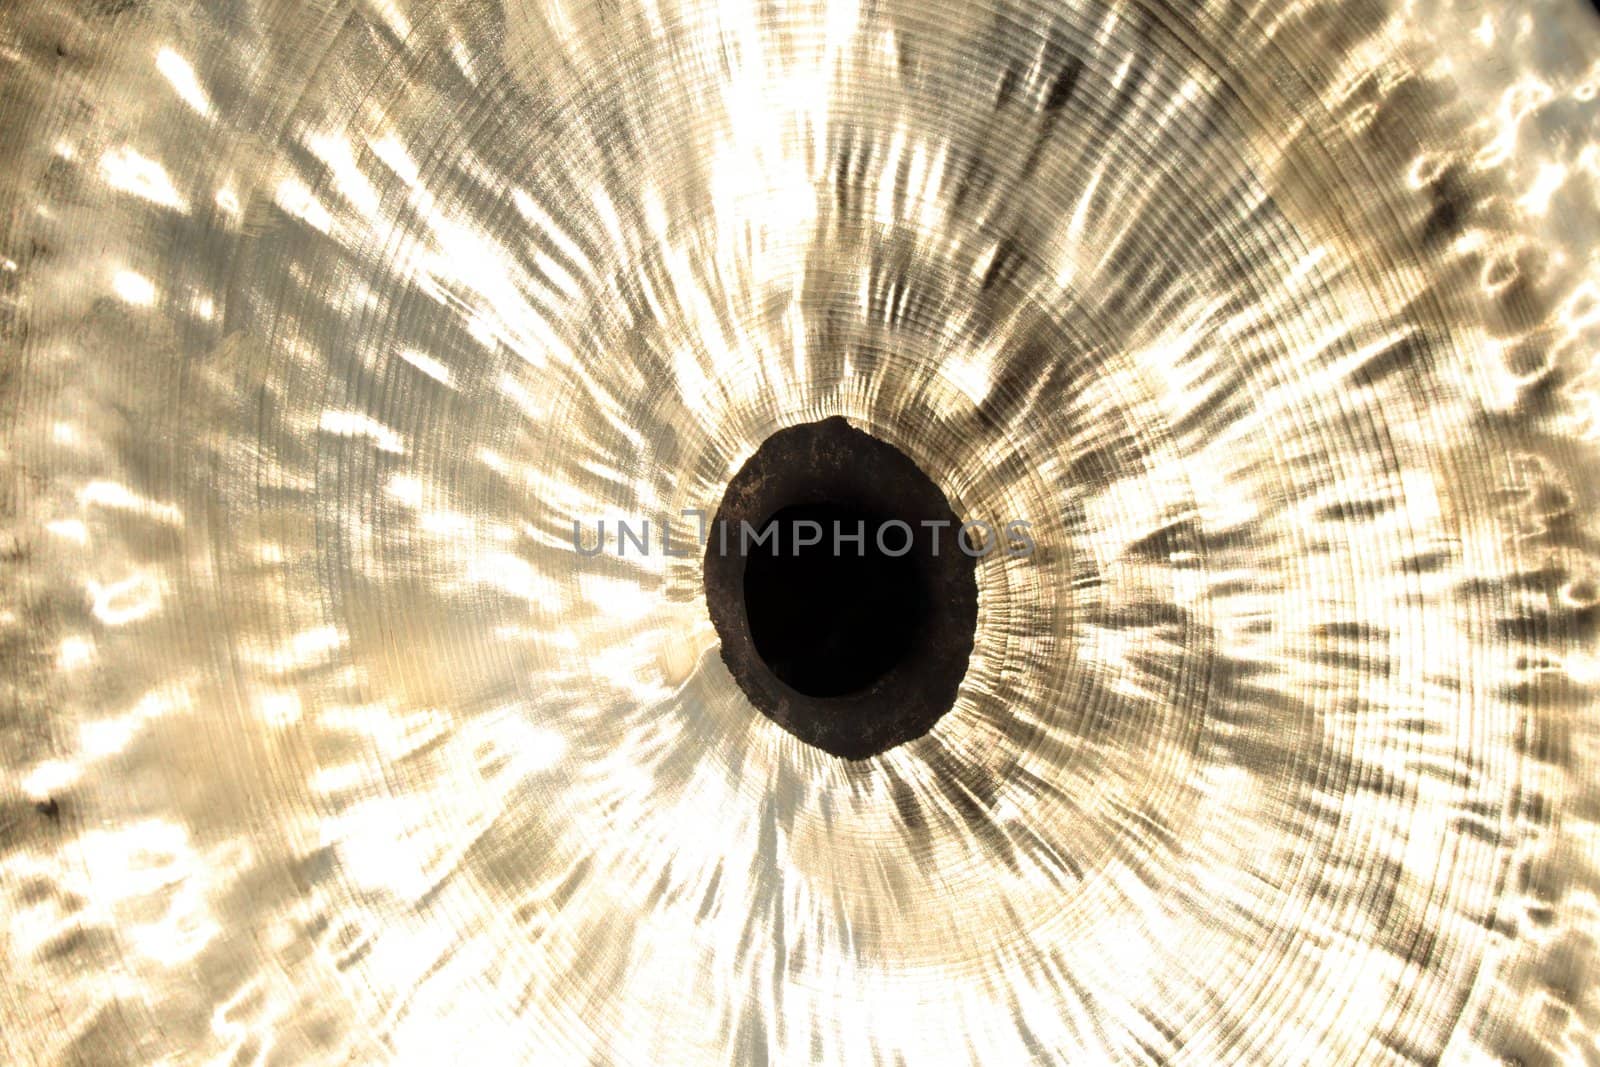 Black mysterious center of a Chinese cymbal. Shiny golden metallic texture.